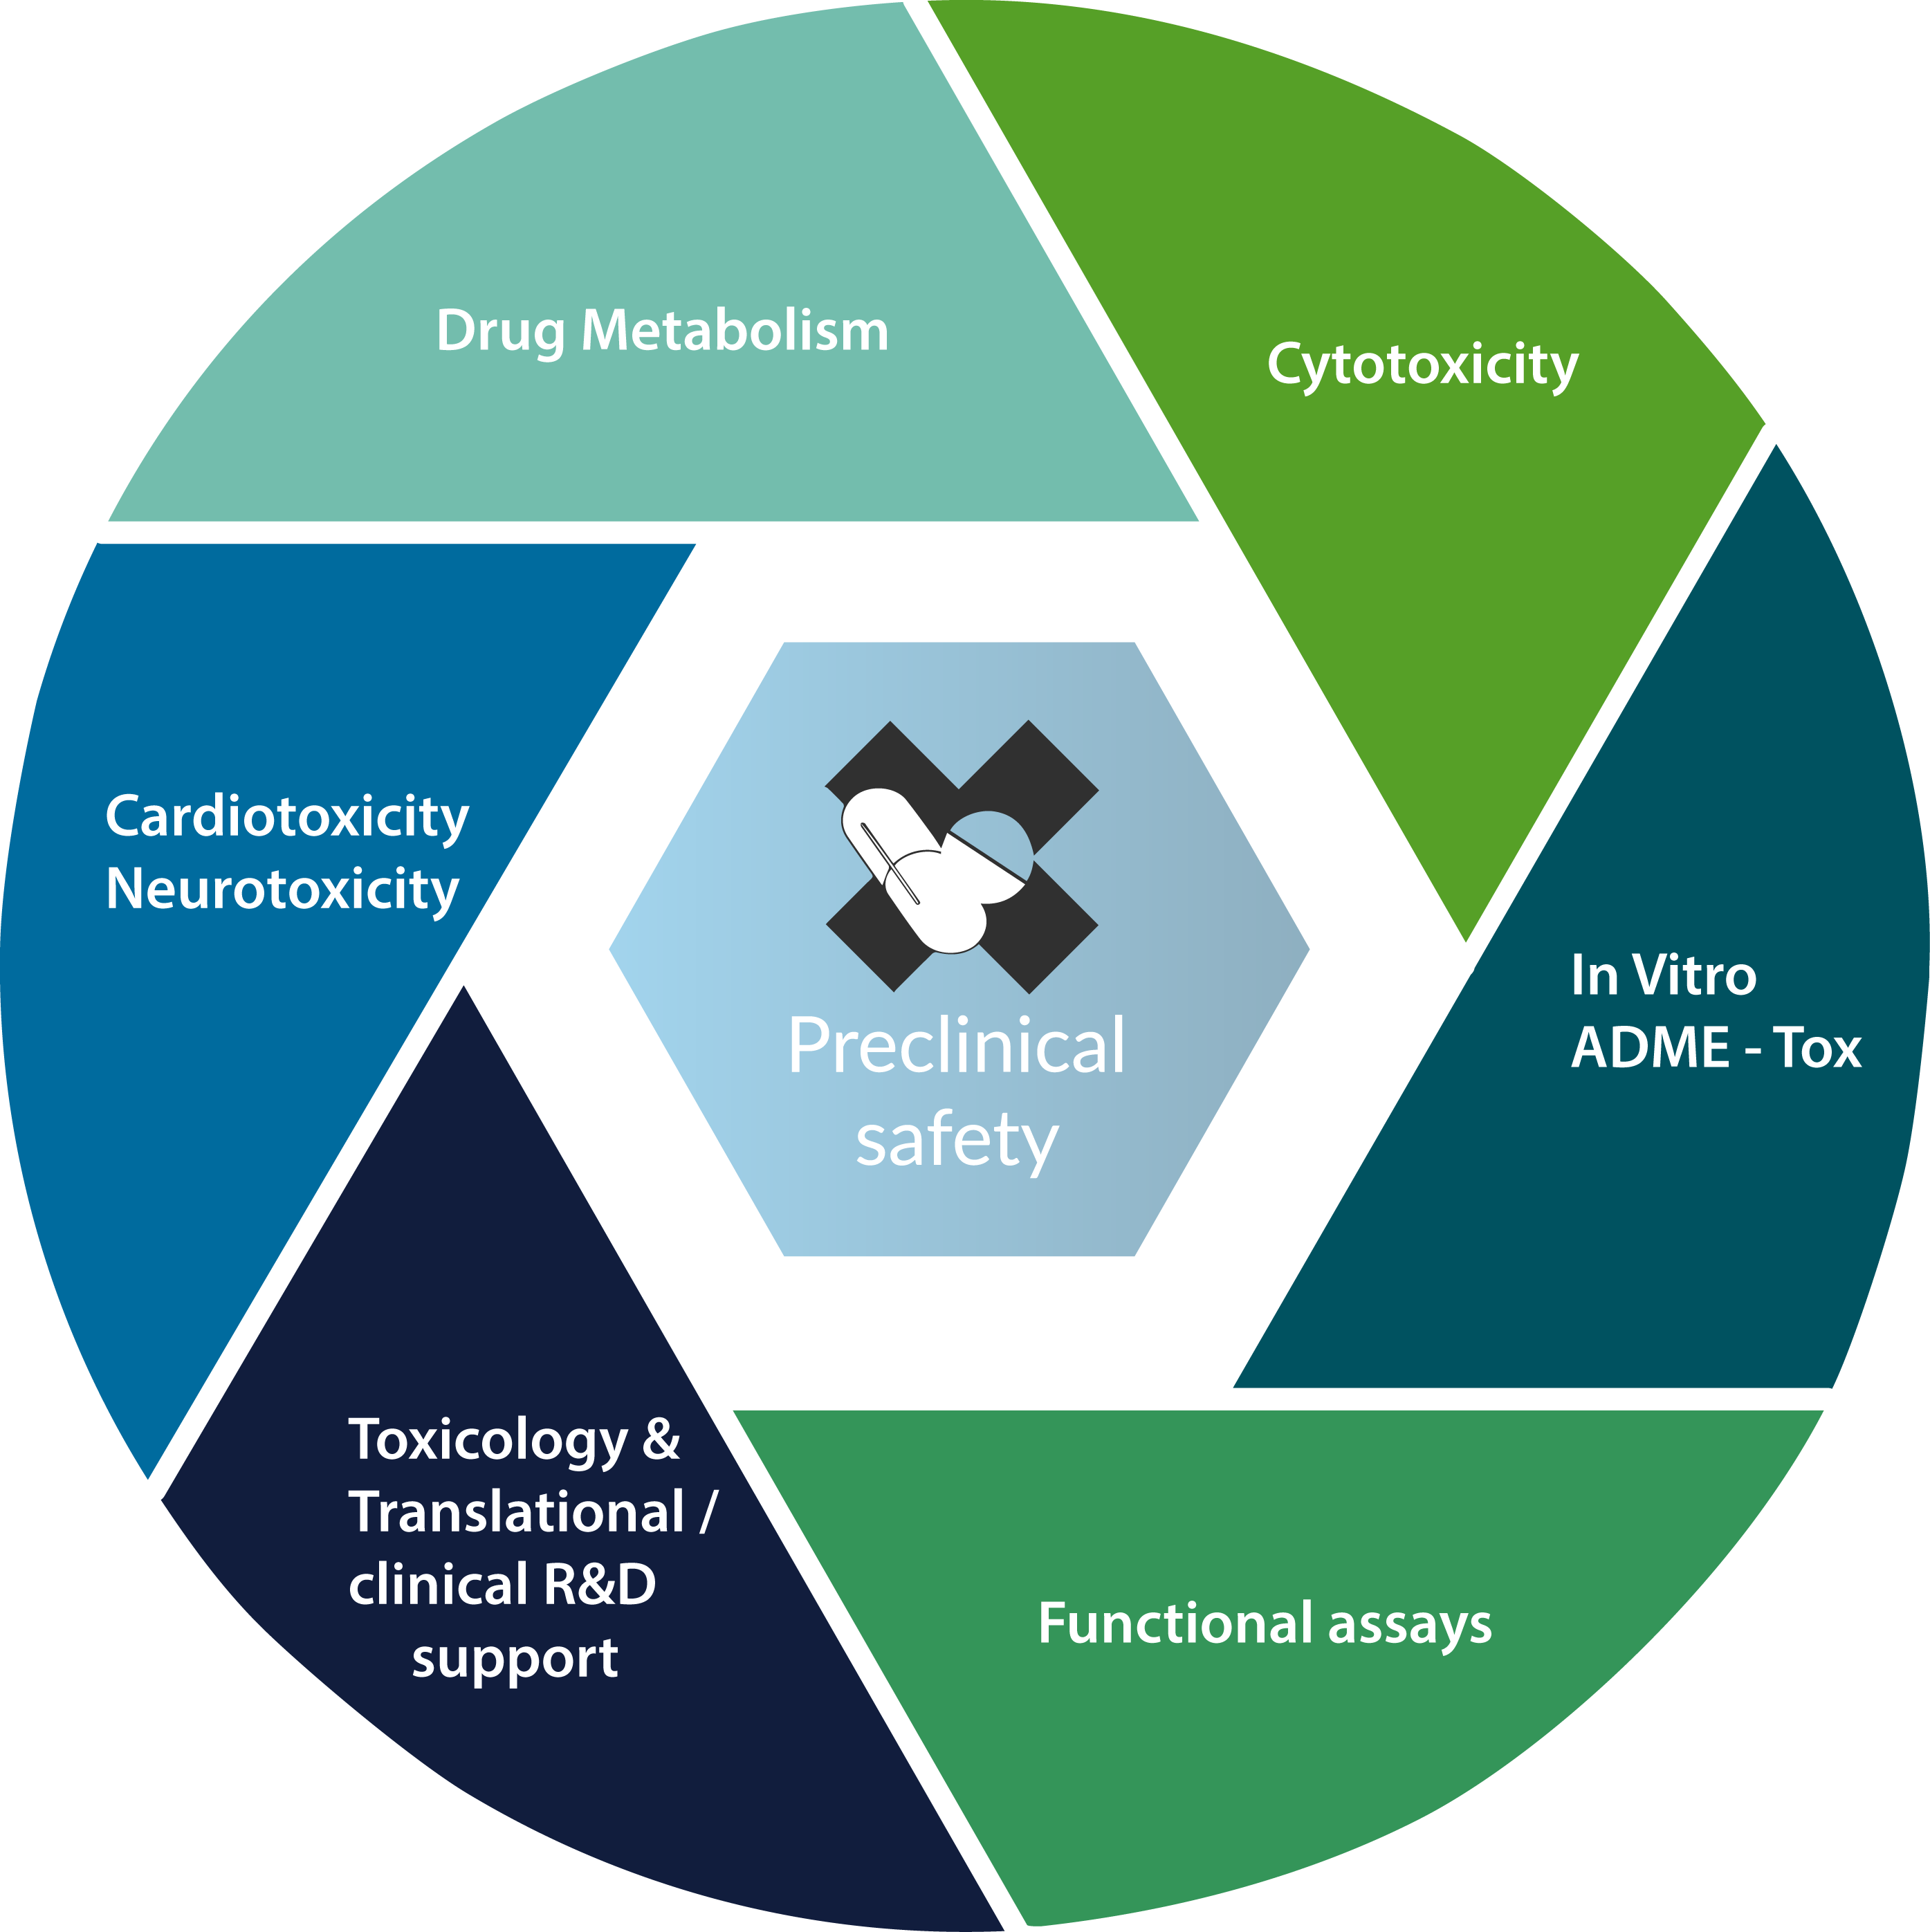 Preclinical safety